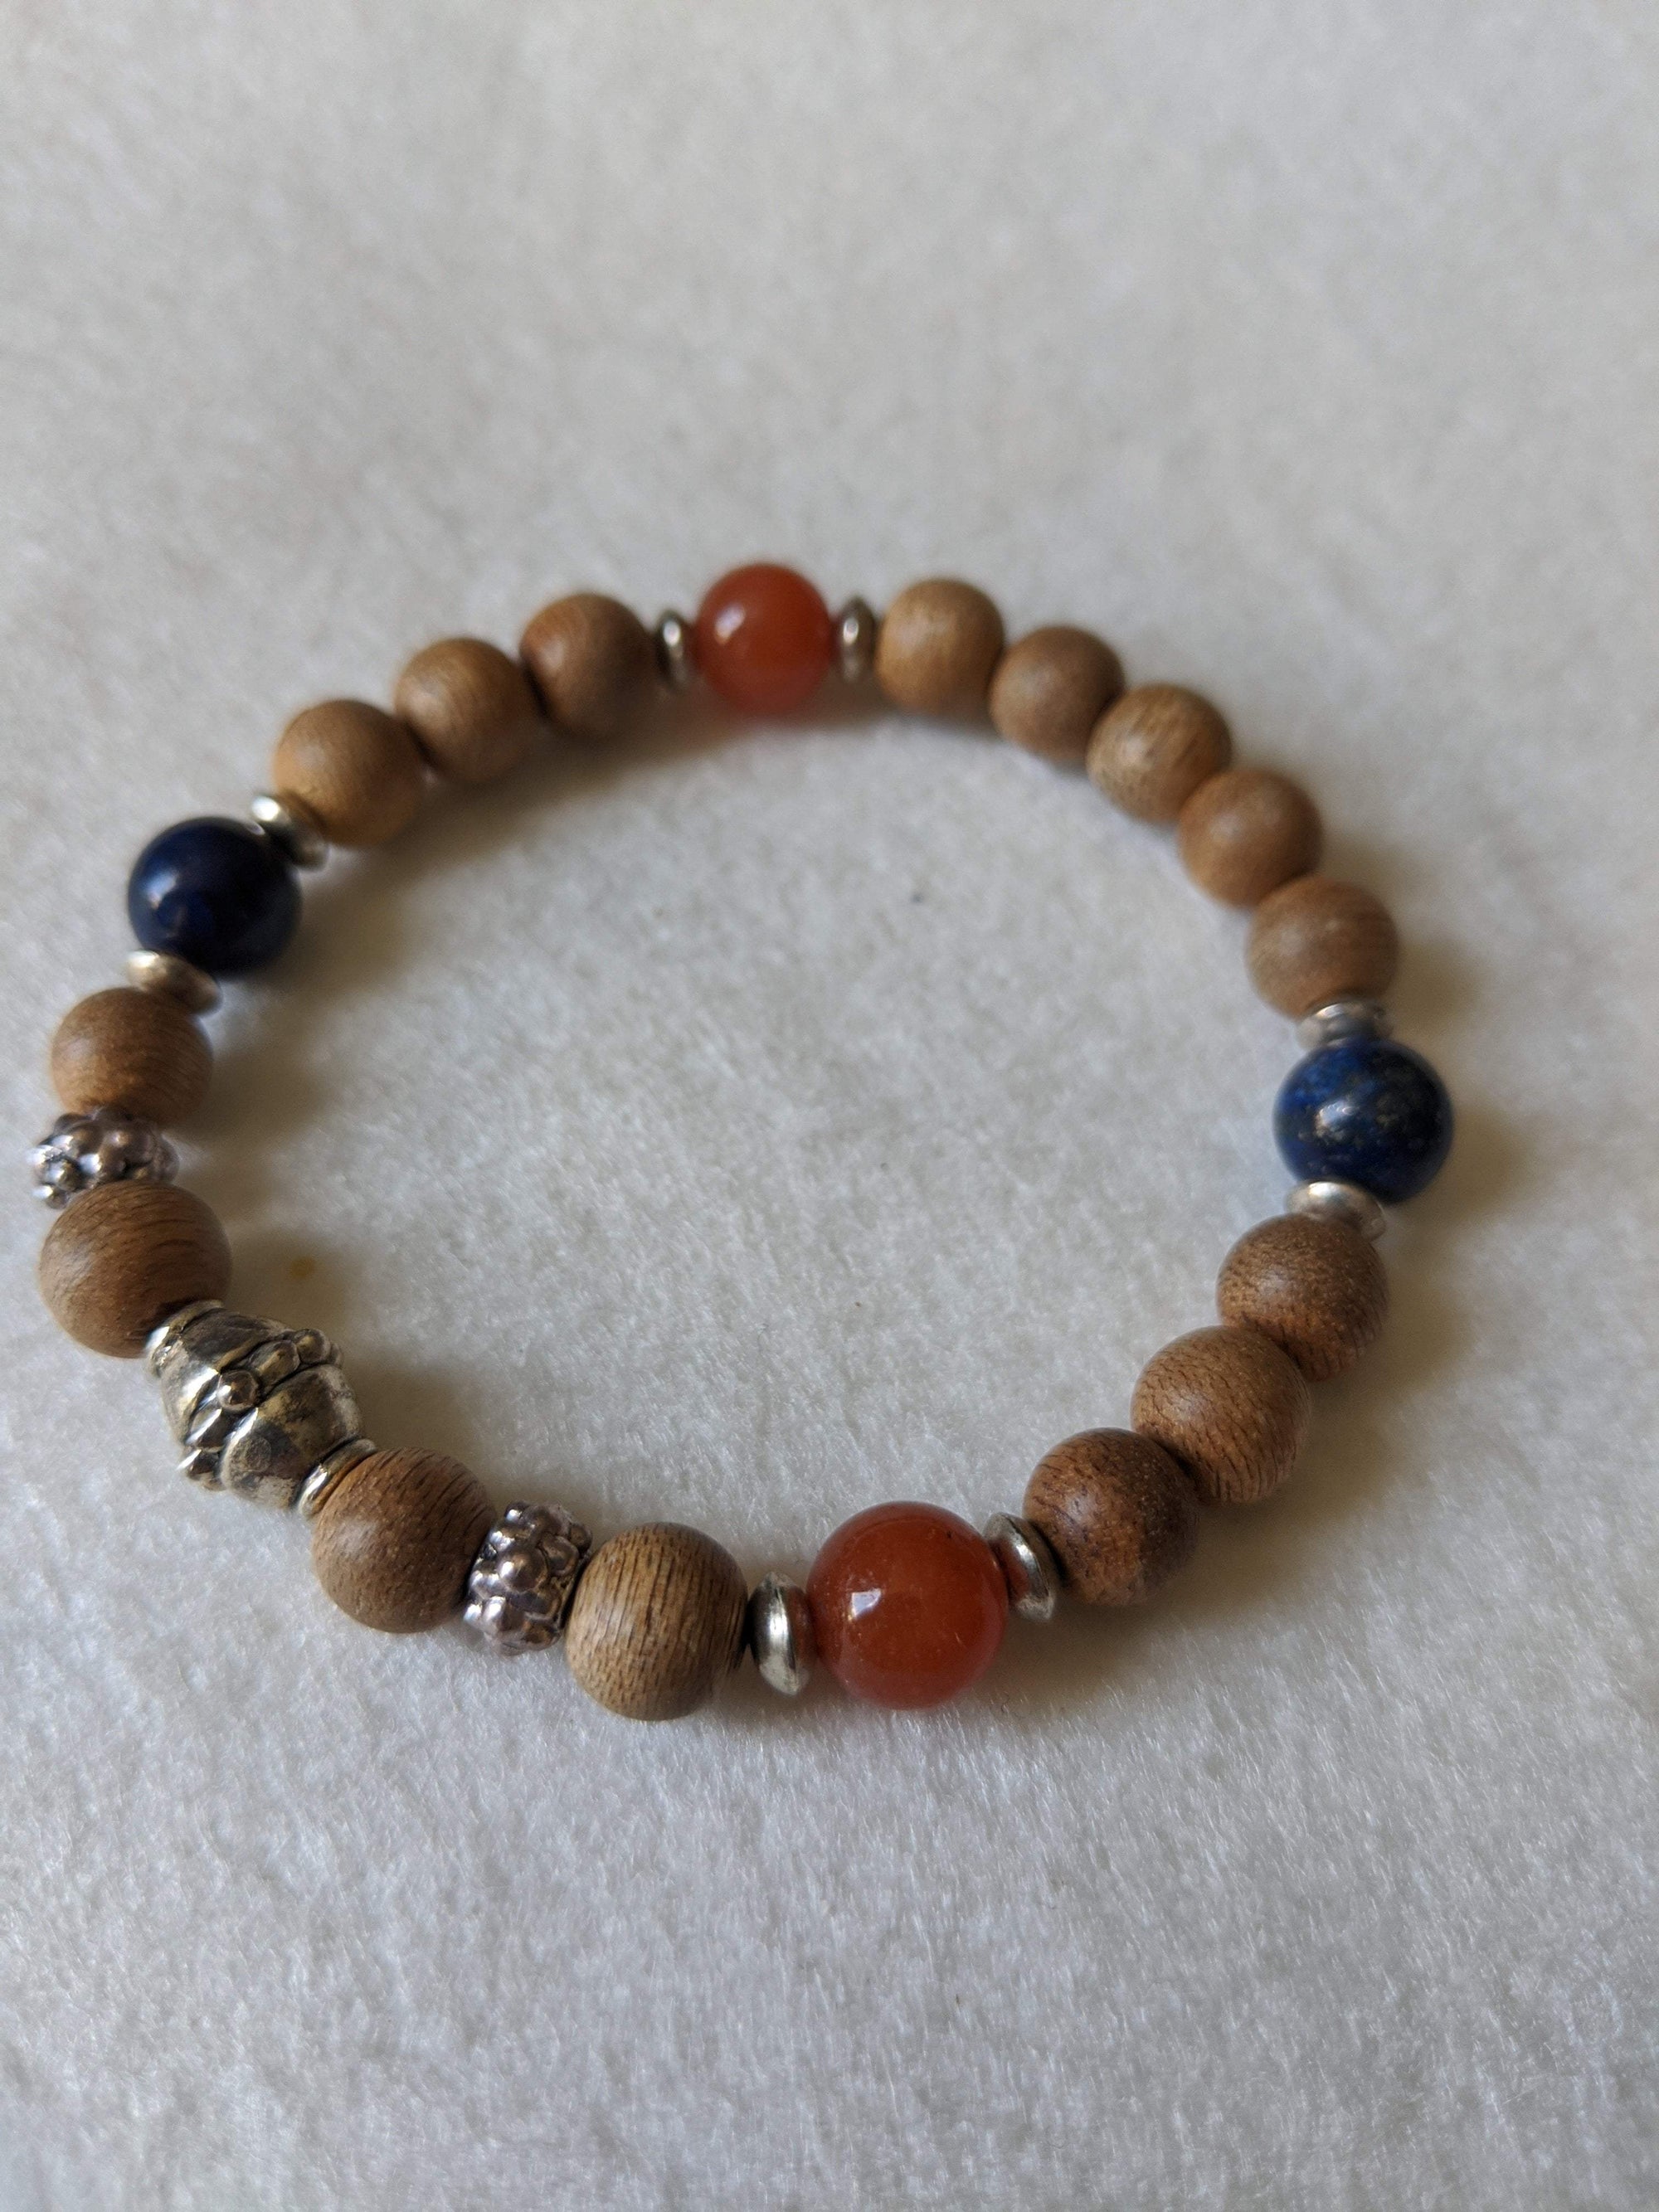 *New* The 4 Elements Metal, Wood, Water, Fire cultivated agarwood gemstone bracelet -